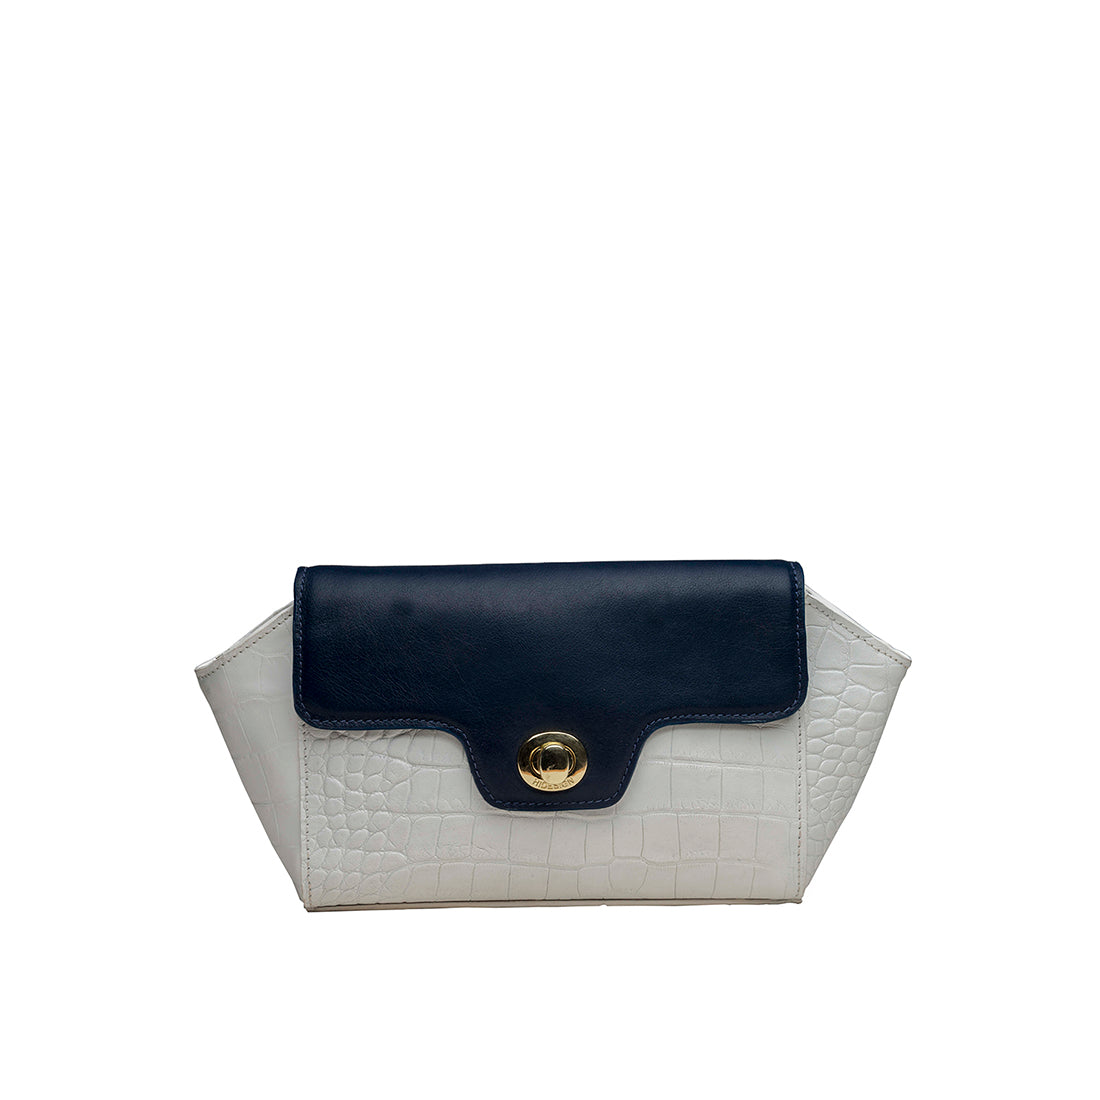 Isle Locada by Hidesign Women's Clutch (Metallic) Price in India, Full  Specifications & Offers | DTashion.com